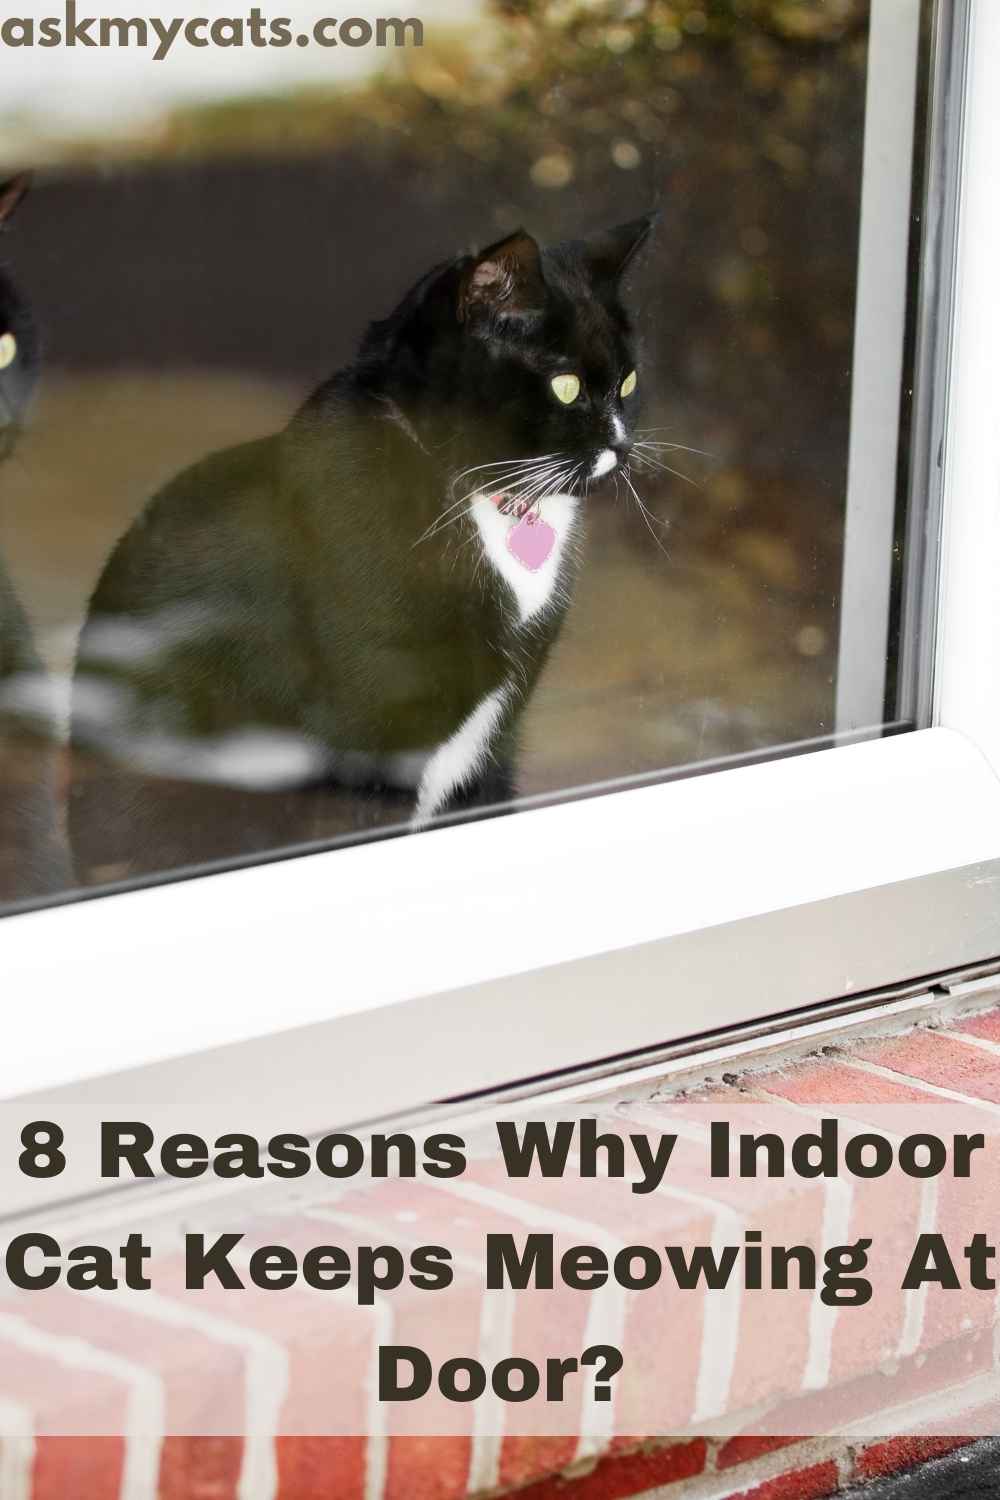 Reasons Why Cat Keeps Meowing At Door! What Does It Want?